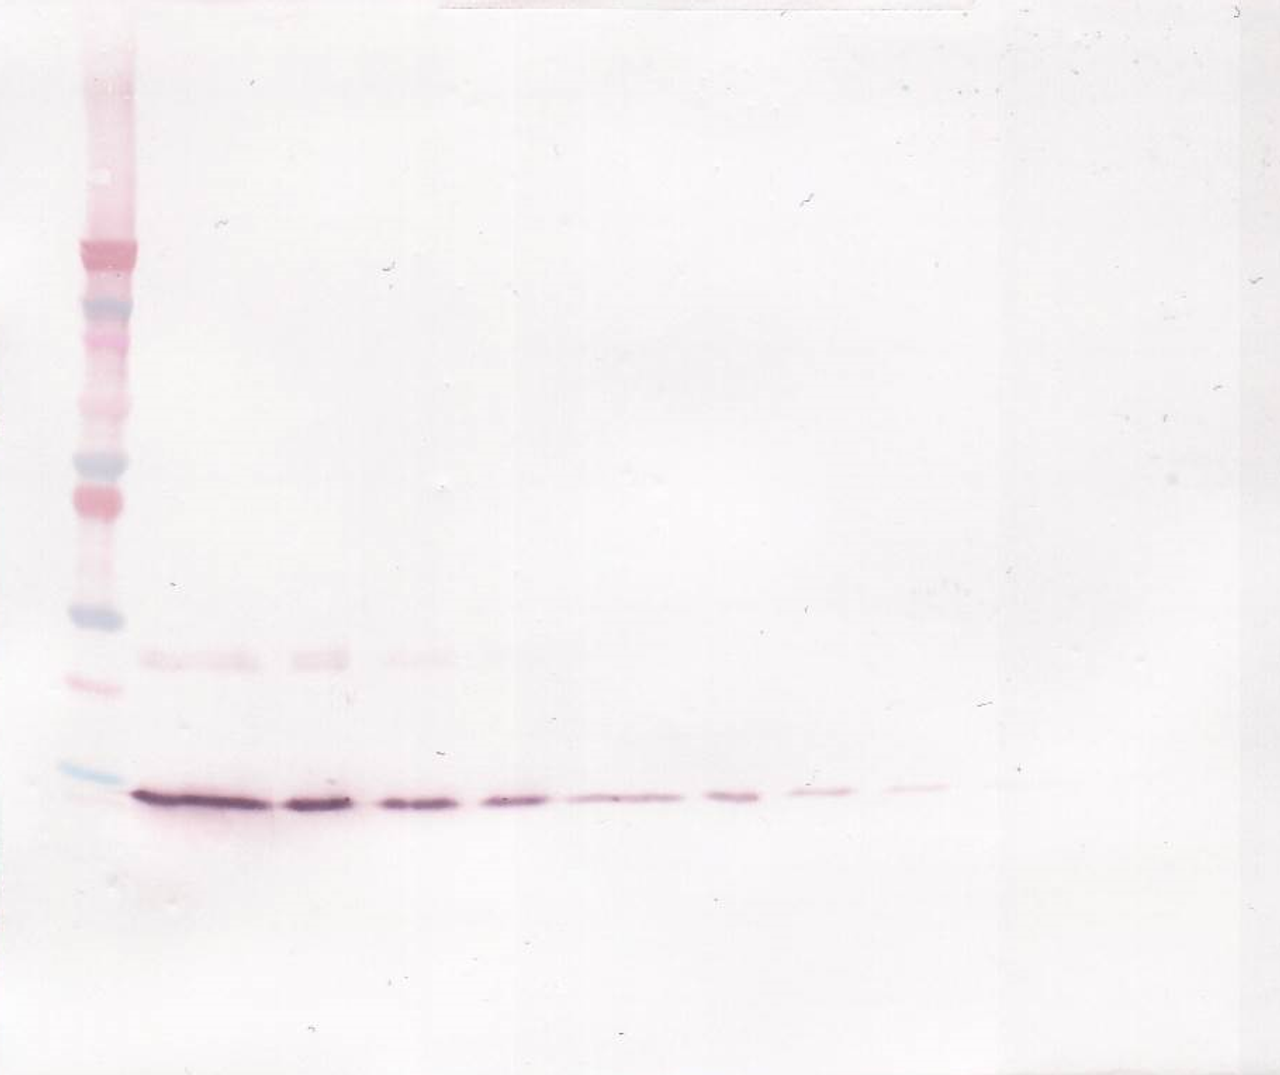 To detect Rat IL-4 by Western Blot analysis this antibody can be used at a concentration of 0.1-0.2 ug/ml. When used in conjunction with compatible secondary reagents, the detection limit for recombinant Rat IL-4 is 1.5-3.0 ng/lane, under either reducing or non-reducing conditions.